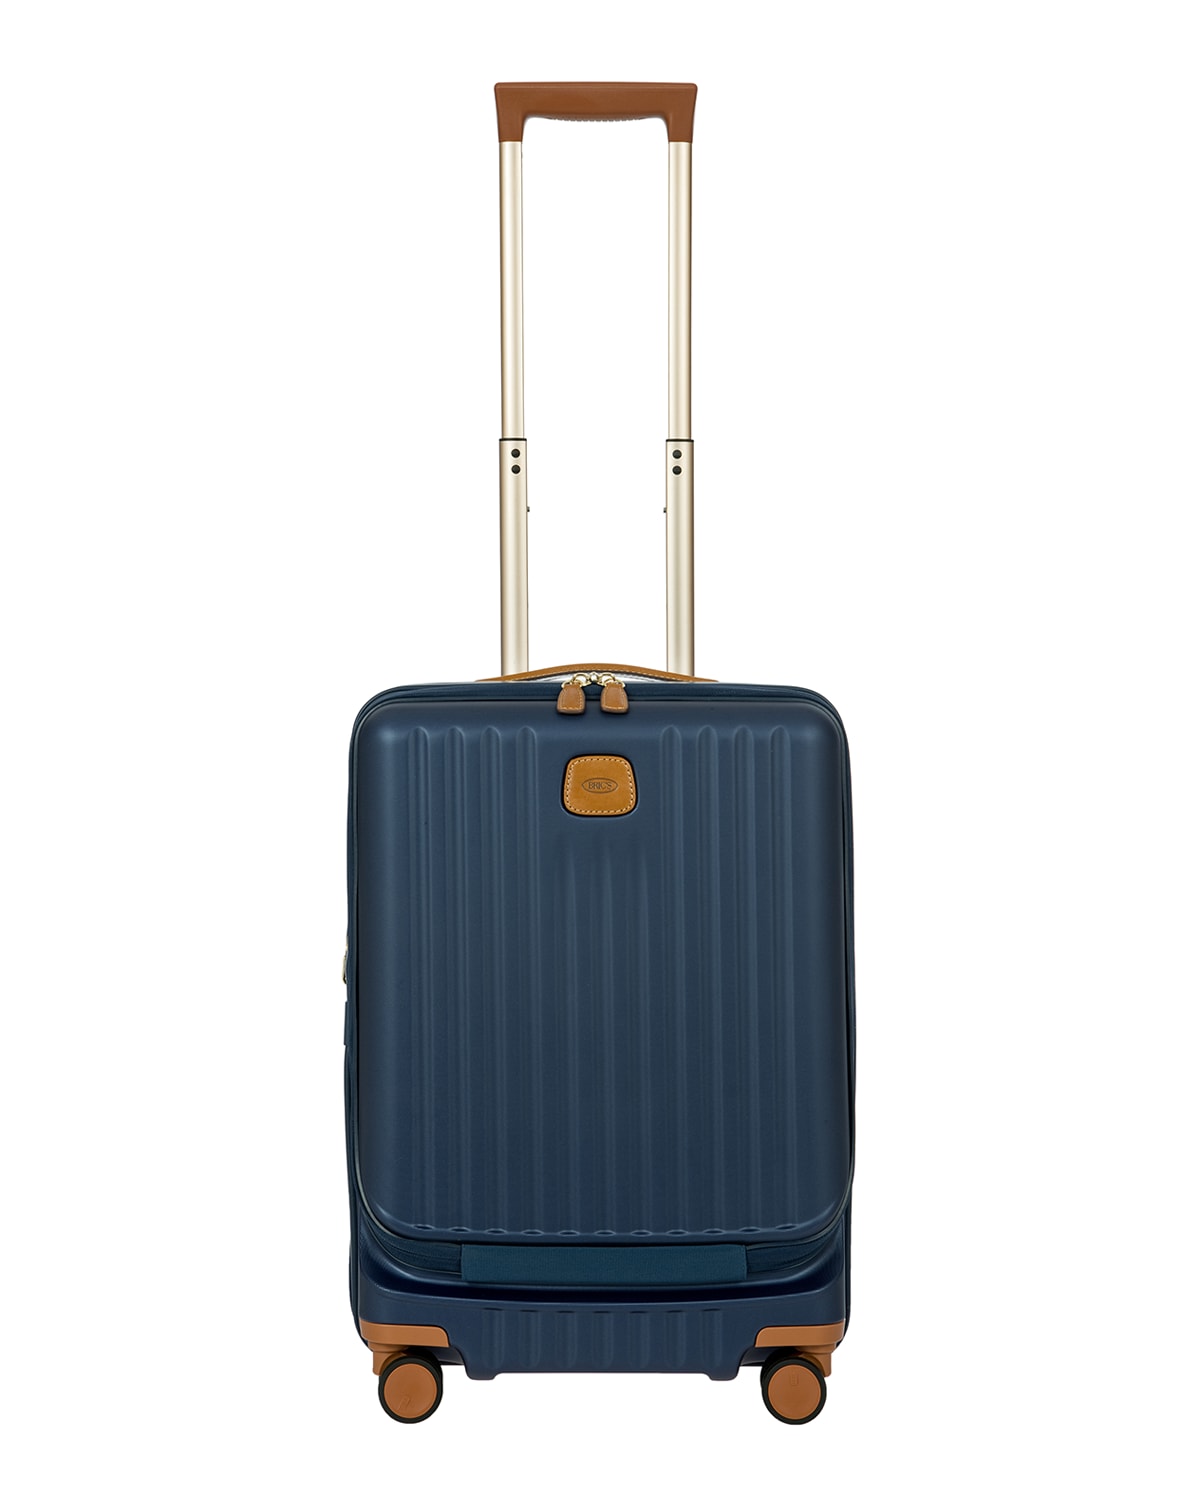 Bric's Capri 2.0 21" Spinner Luggage with Pocket